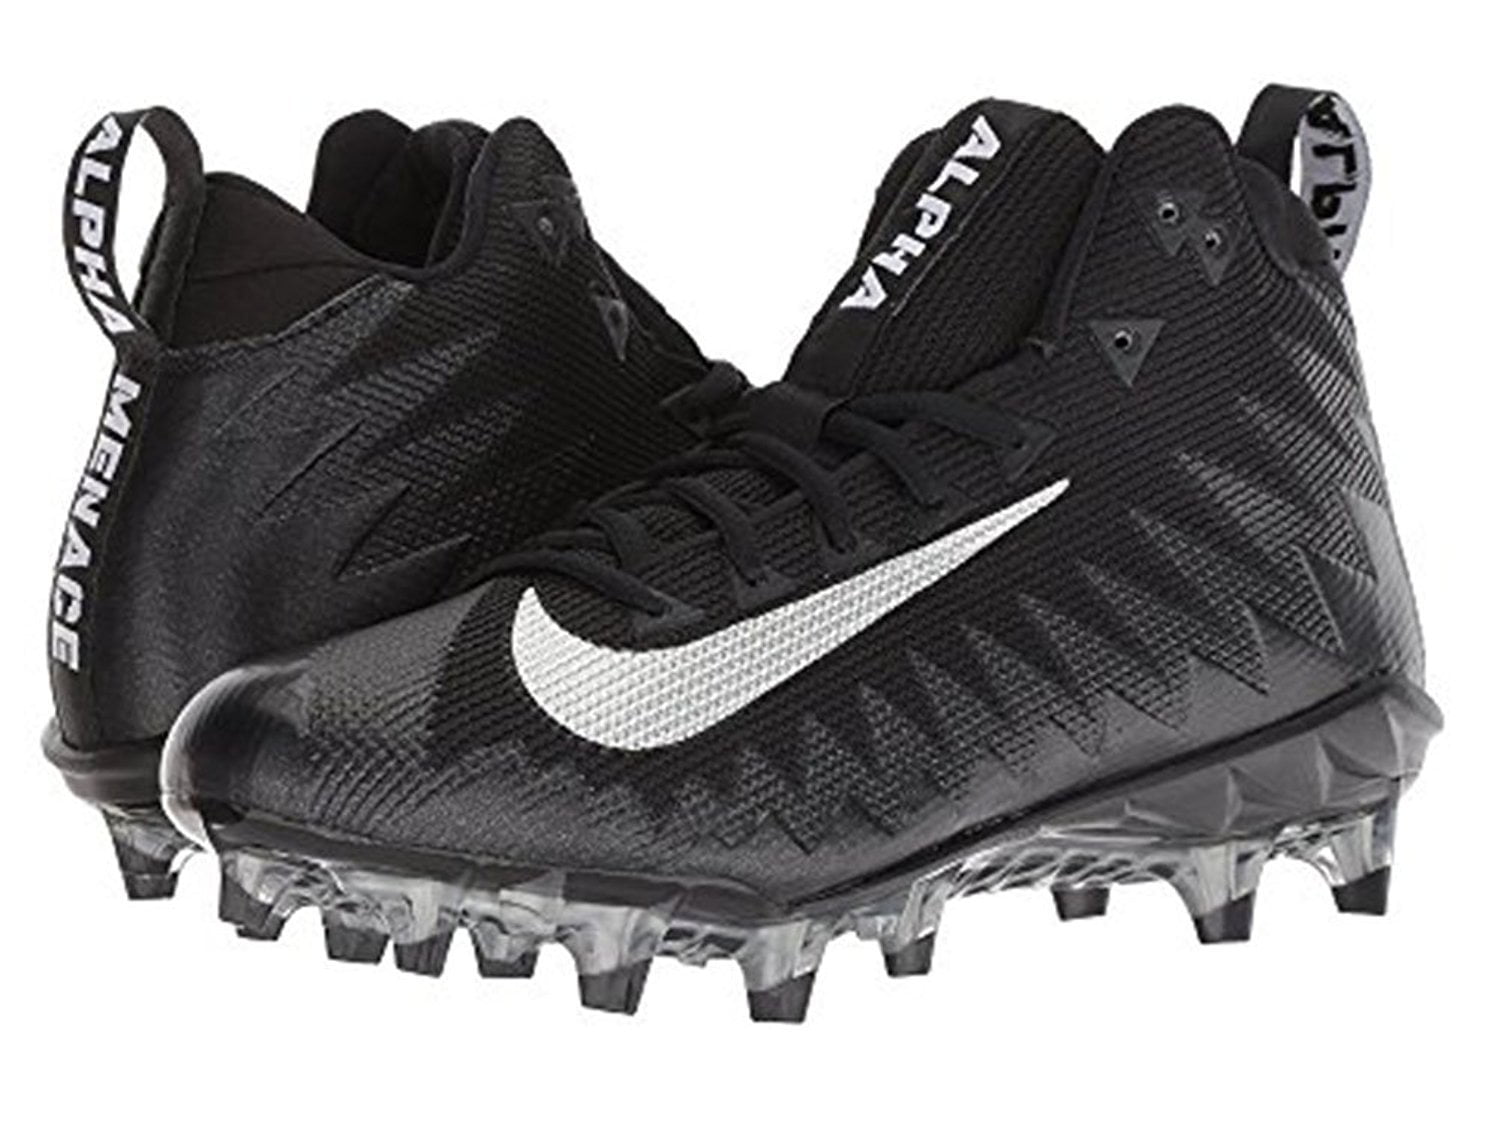 football cleats size 10.5